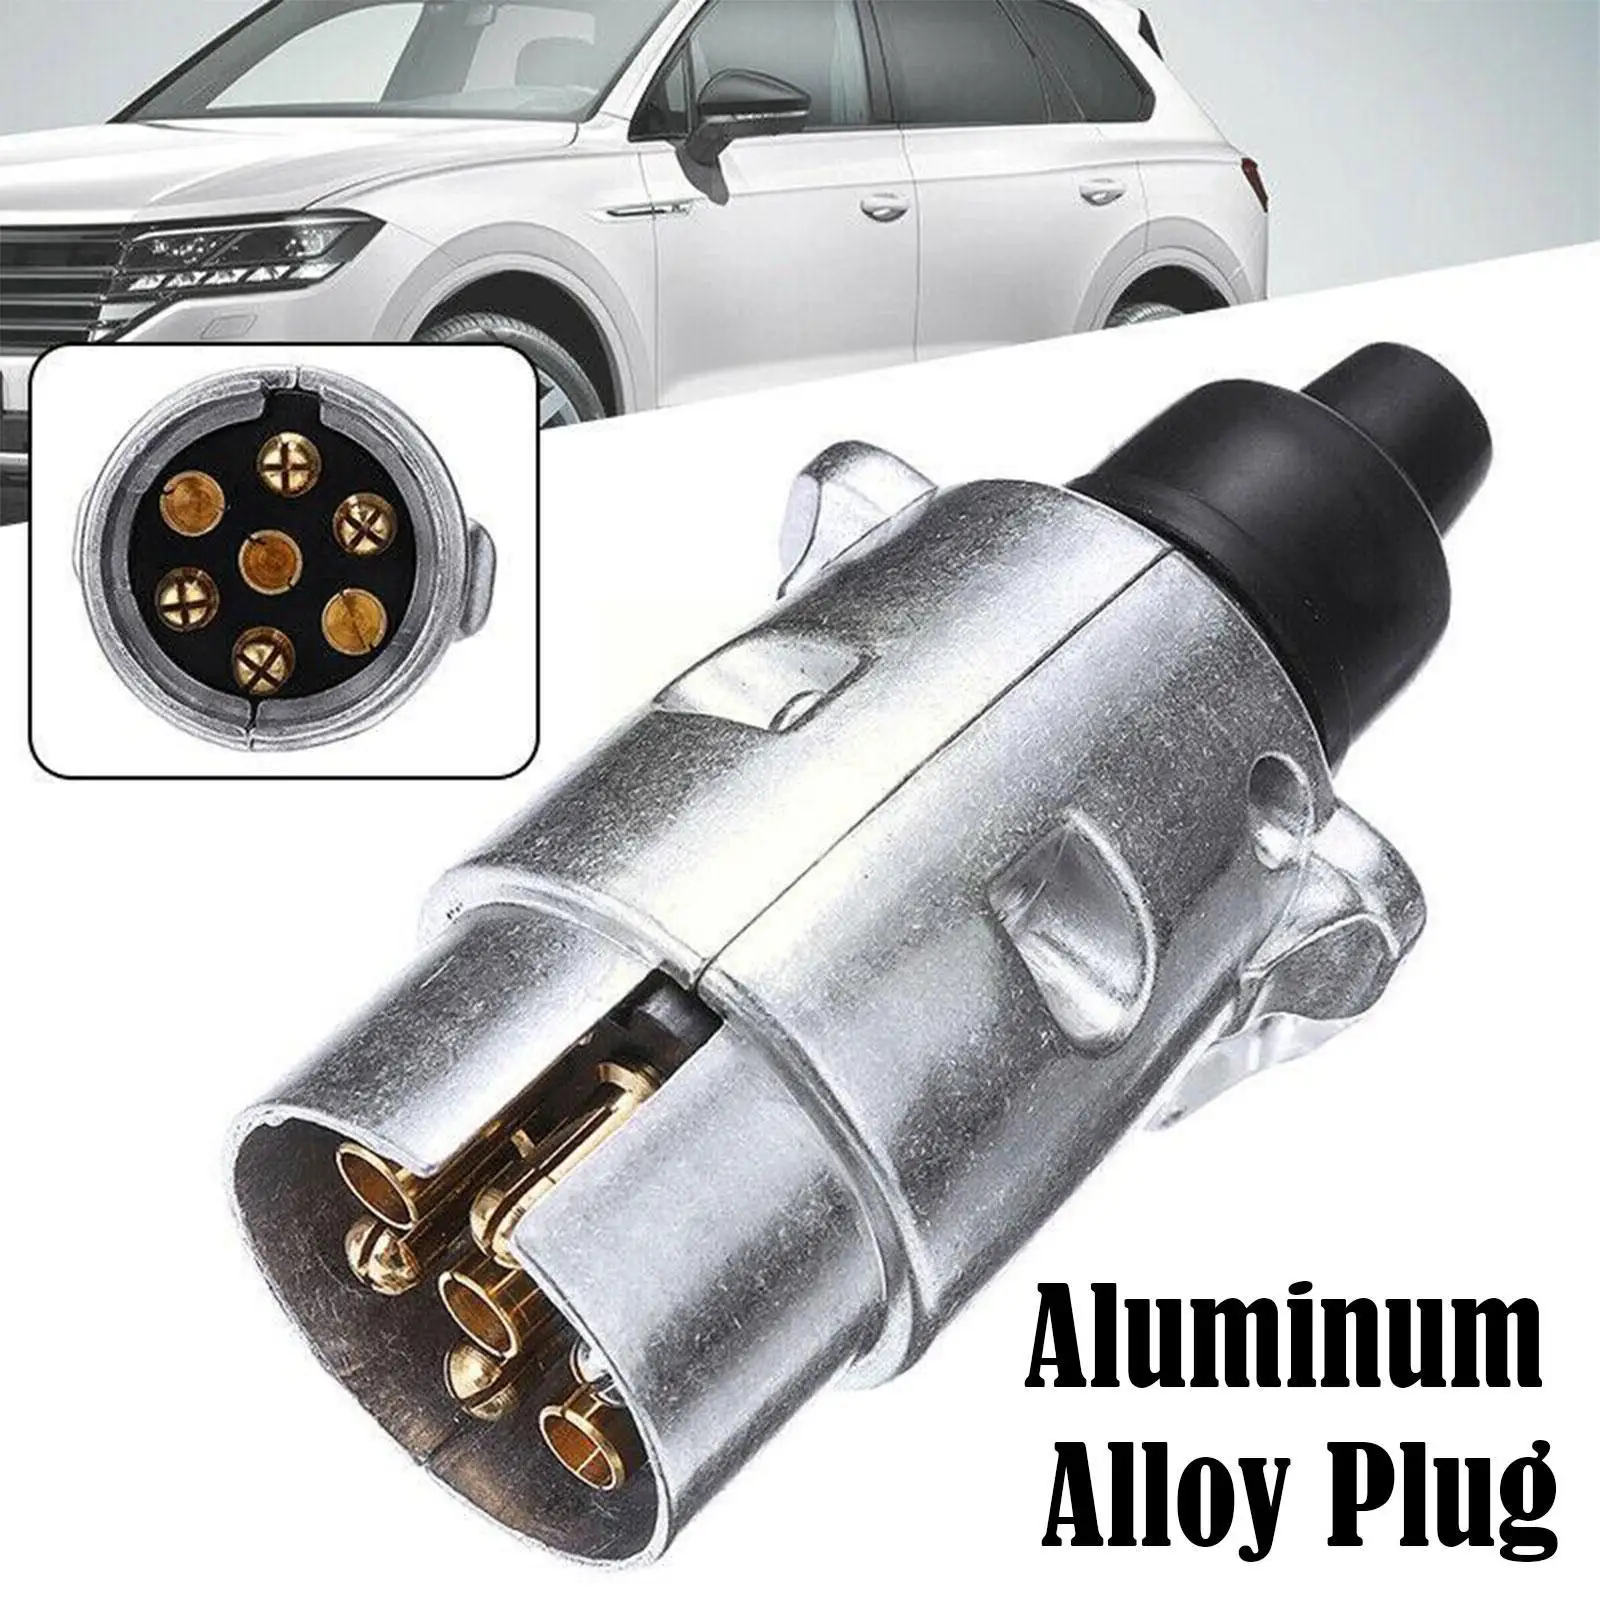 12V 7 Pin Aluminium Alloy Plug Trailer Connector plug For Boat Car/Truck 19cm crane trailer tow fire rescue truck toys pull back alloy diecasts